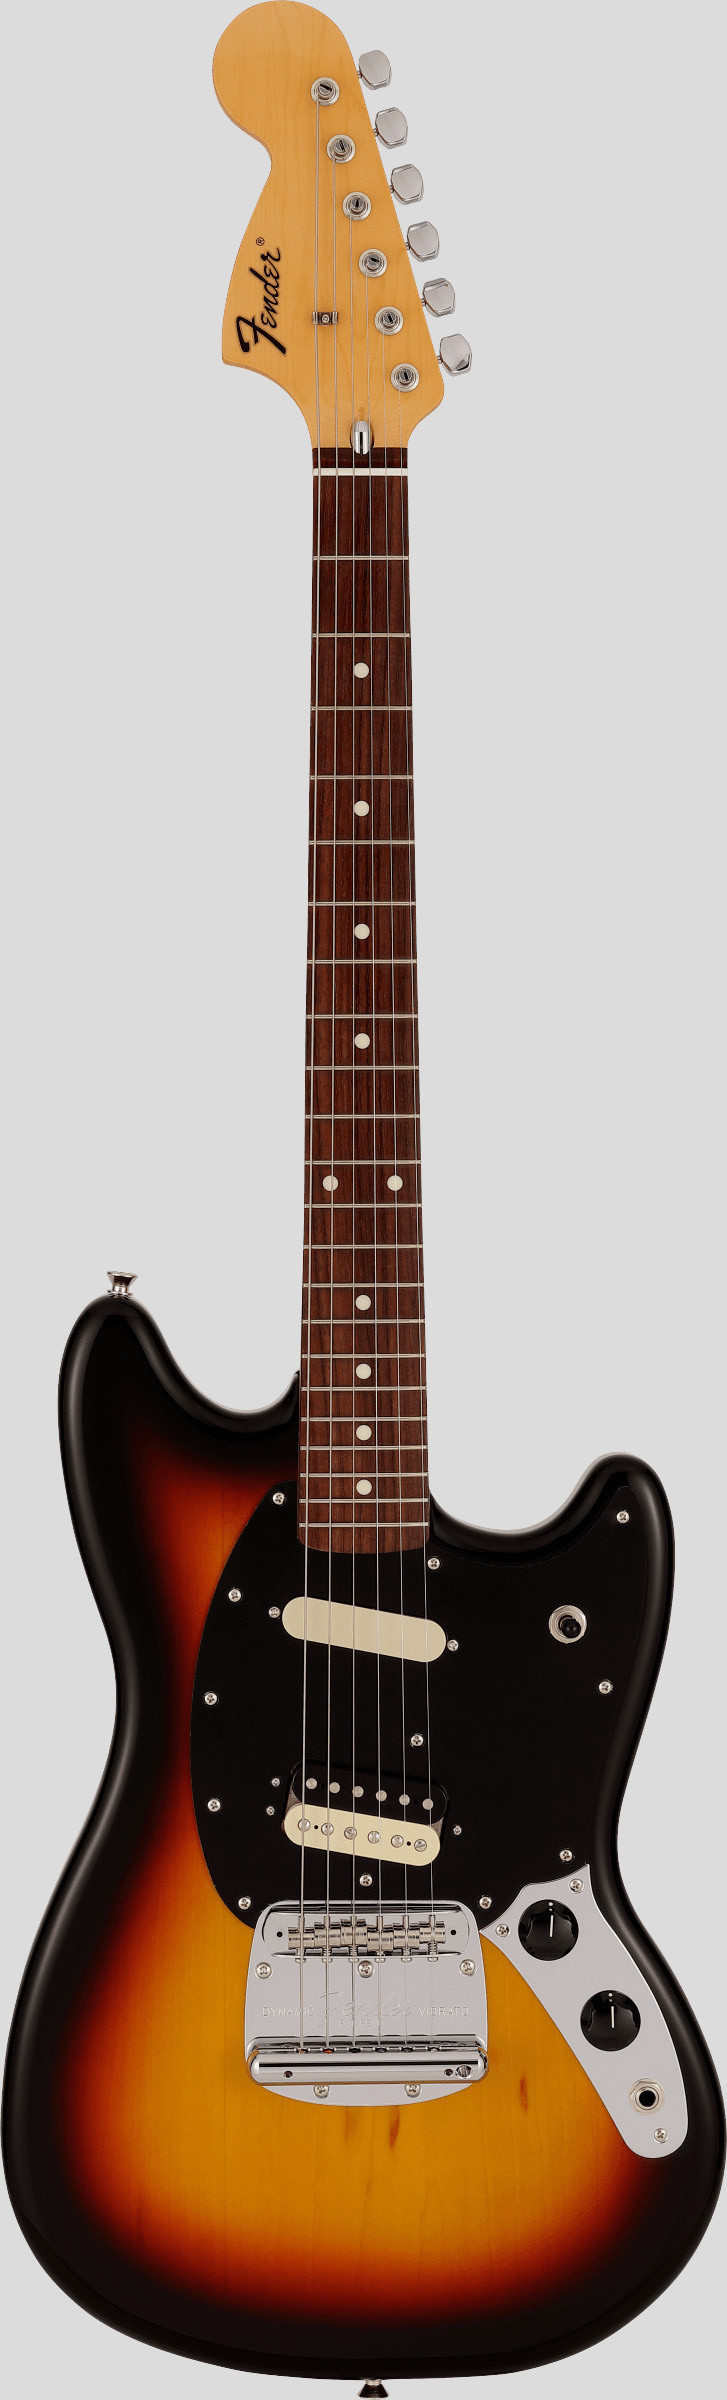 Fender Limited Edition Traditional Mustang Reverse Head 3-Color Sunburst 1